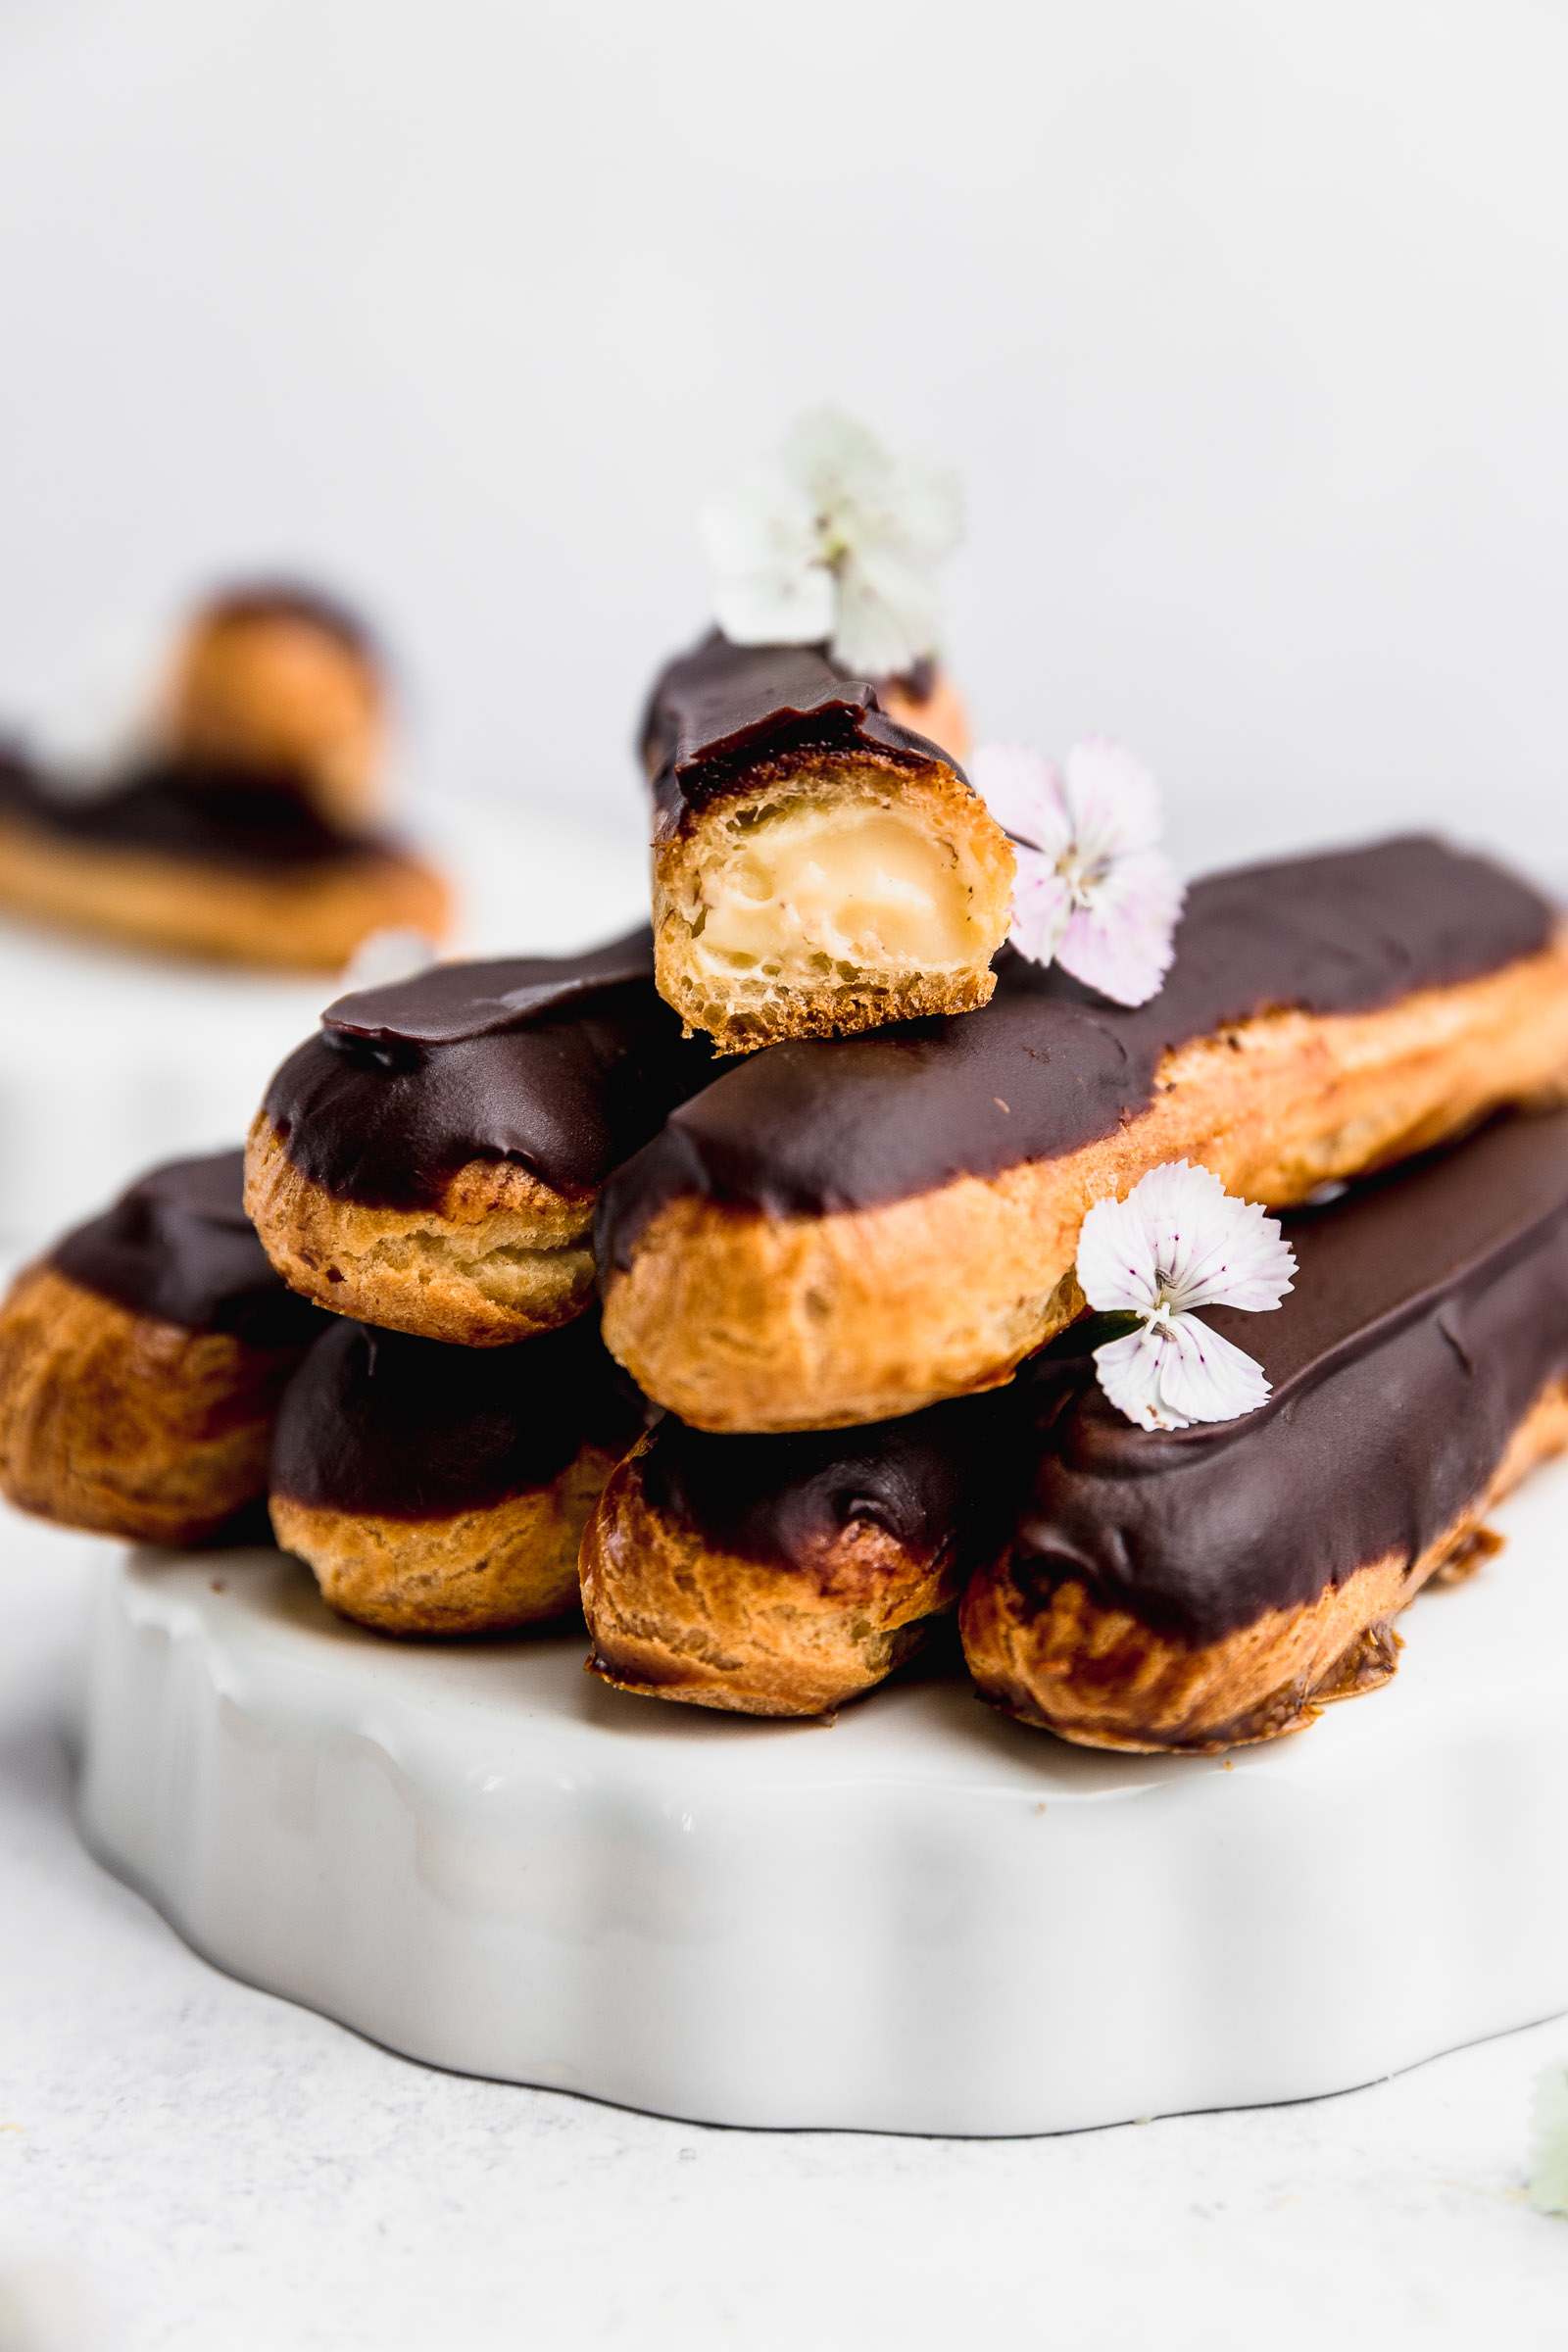 A pyramid of chocolate éclairs with for in the bottom, two on the second layer and one, split in half in a cross section to show the pastry cream on the inside. These are also light pink edible flowers laying on them.